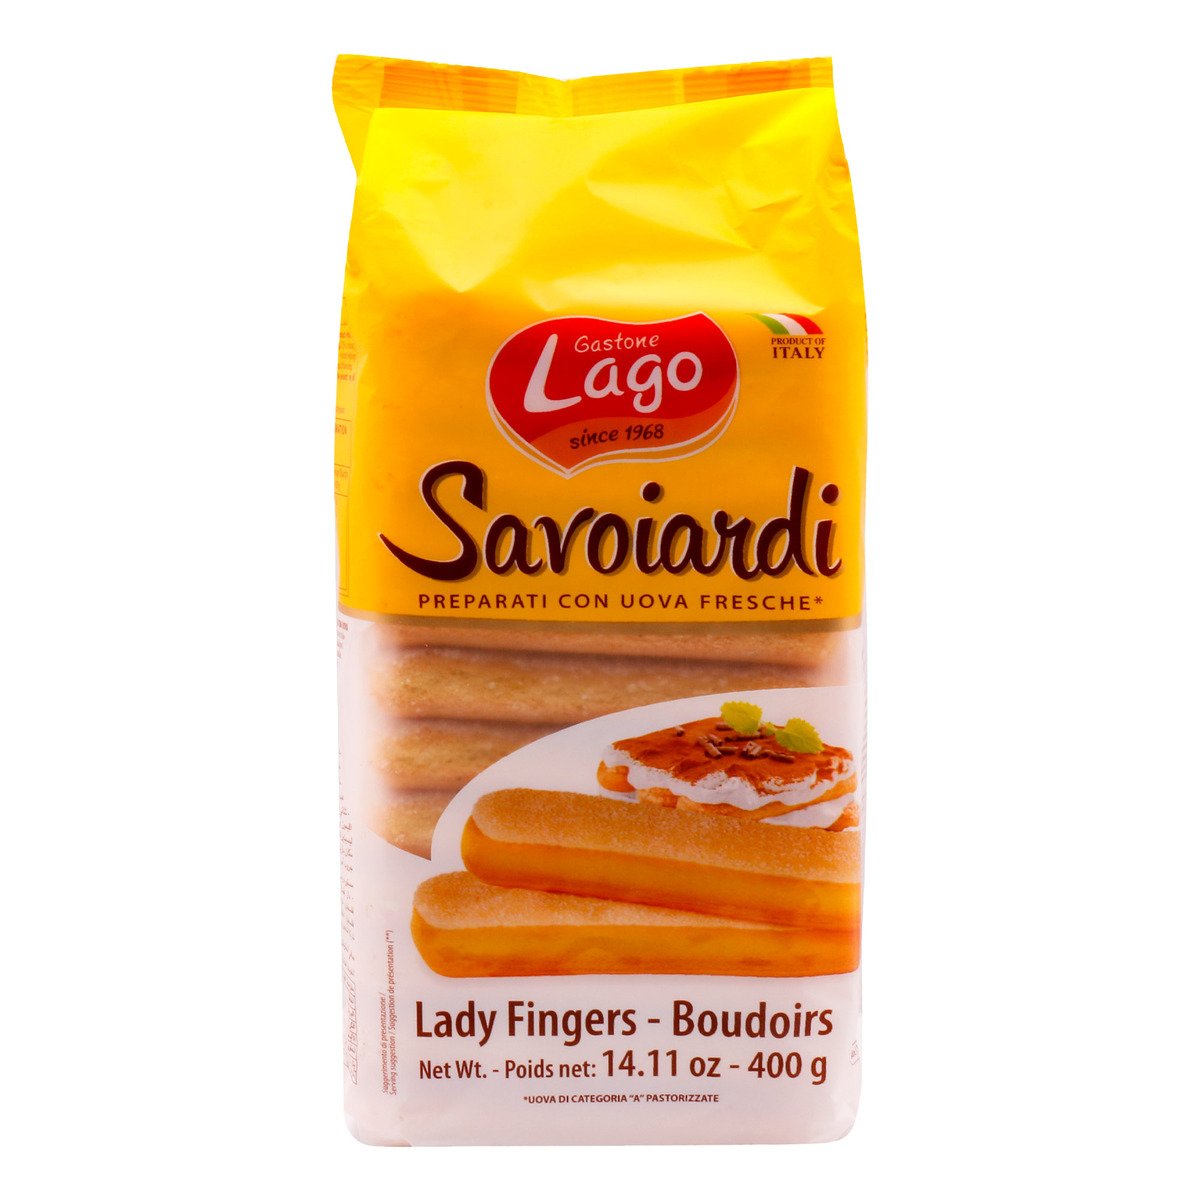 Gastone Lago Lady Fingers Biscuits 400 g